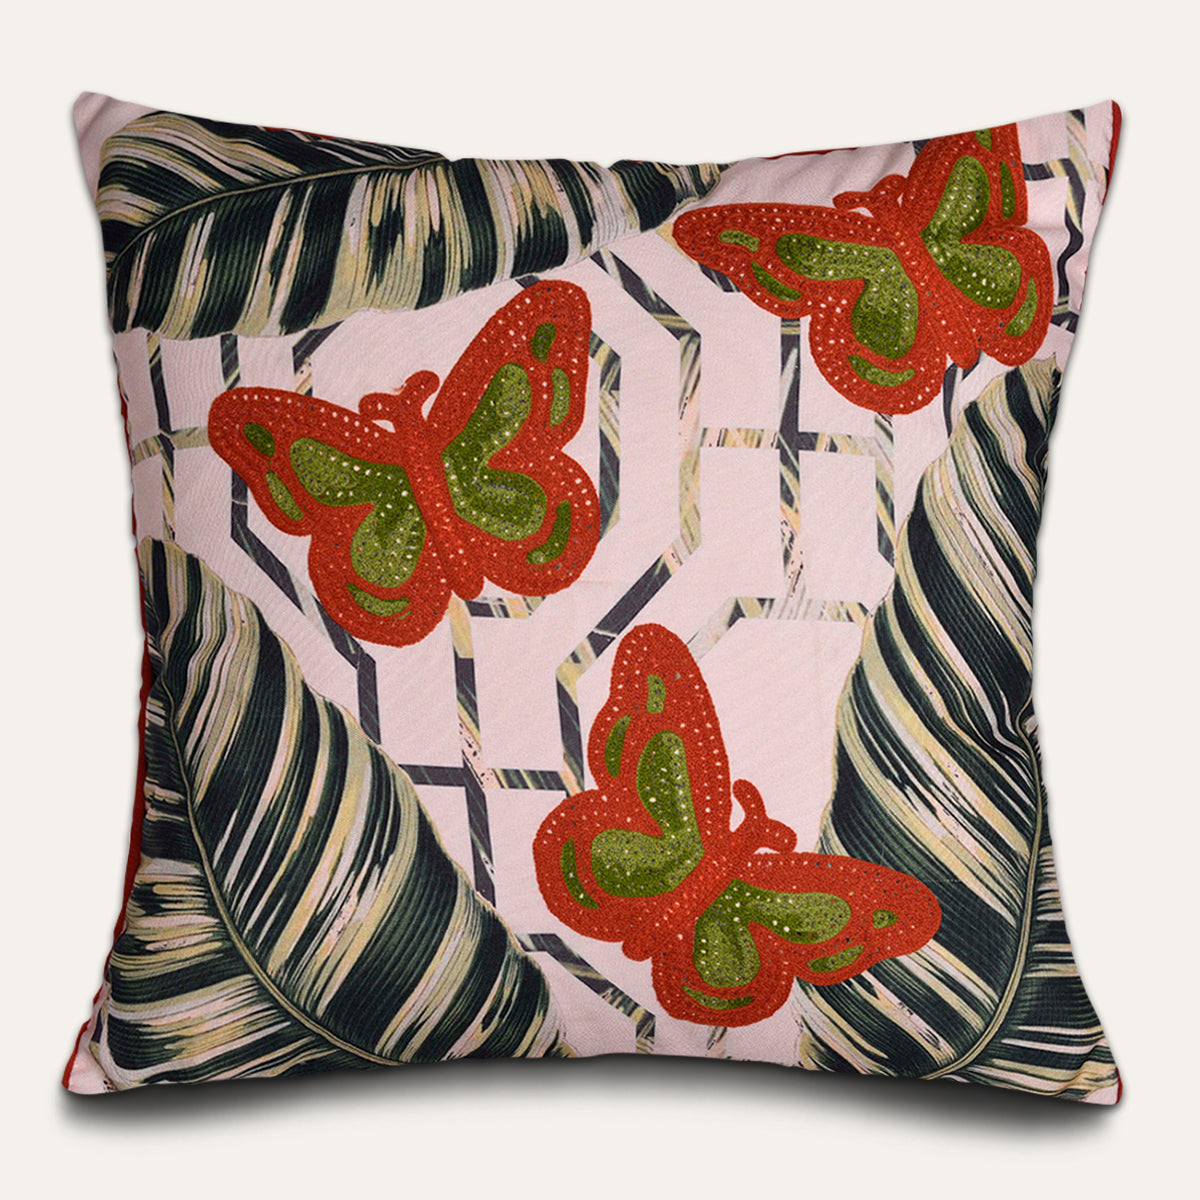 Butterfly Printed Design Throw Pillow Covers - Decozen